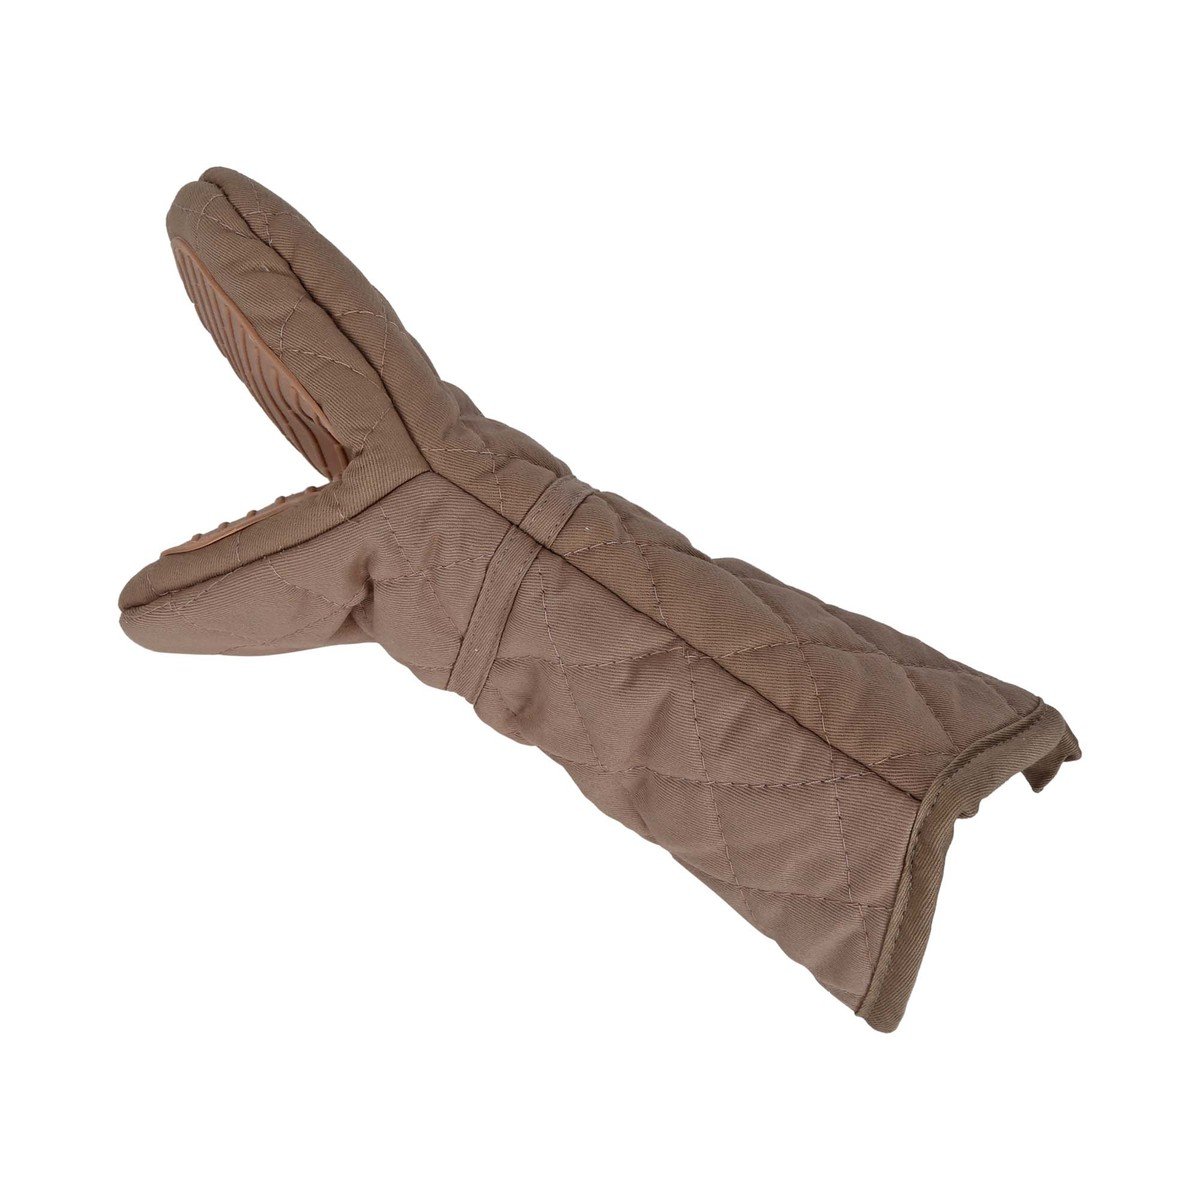 Home Microwave Oven Glove CXY-004